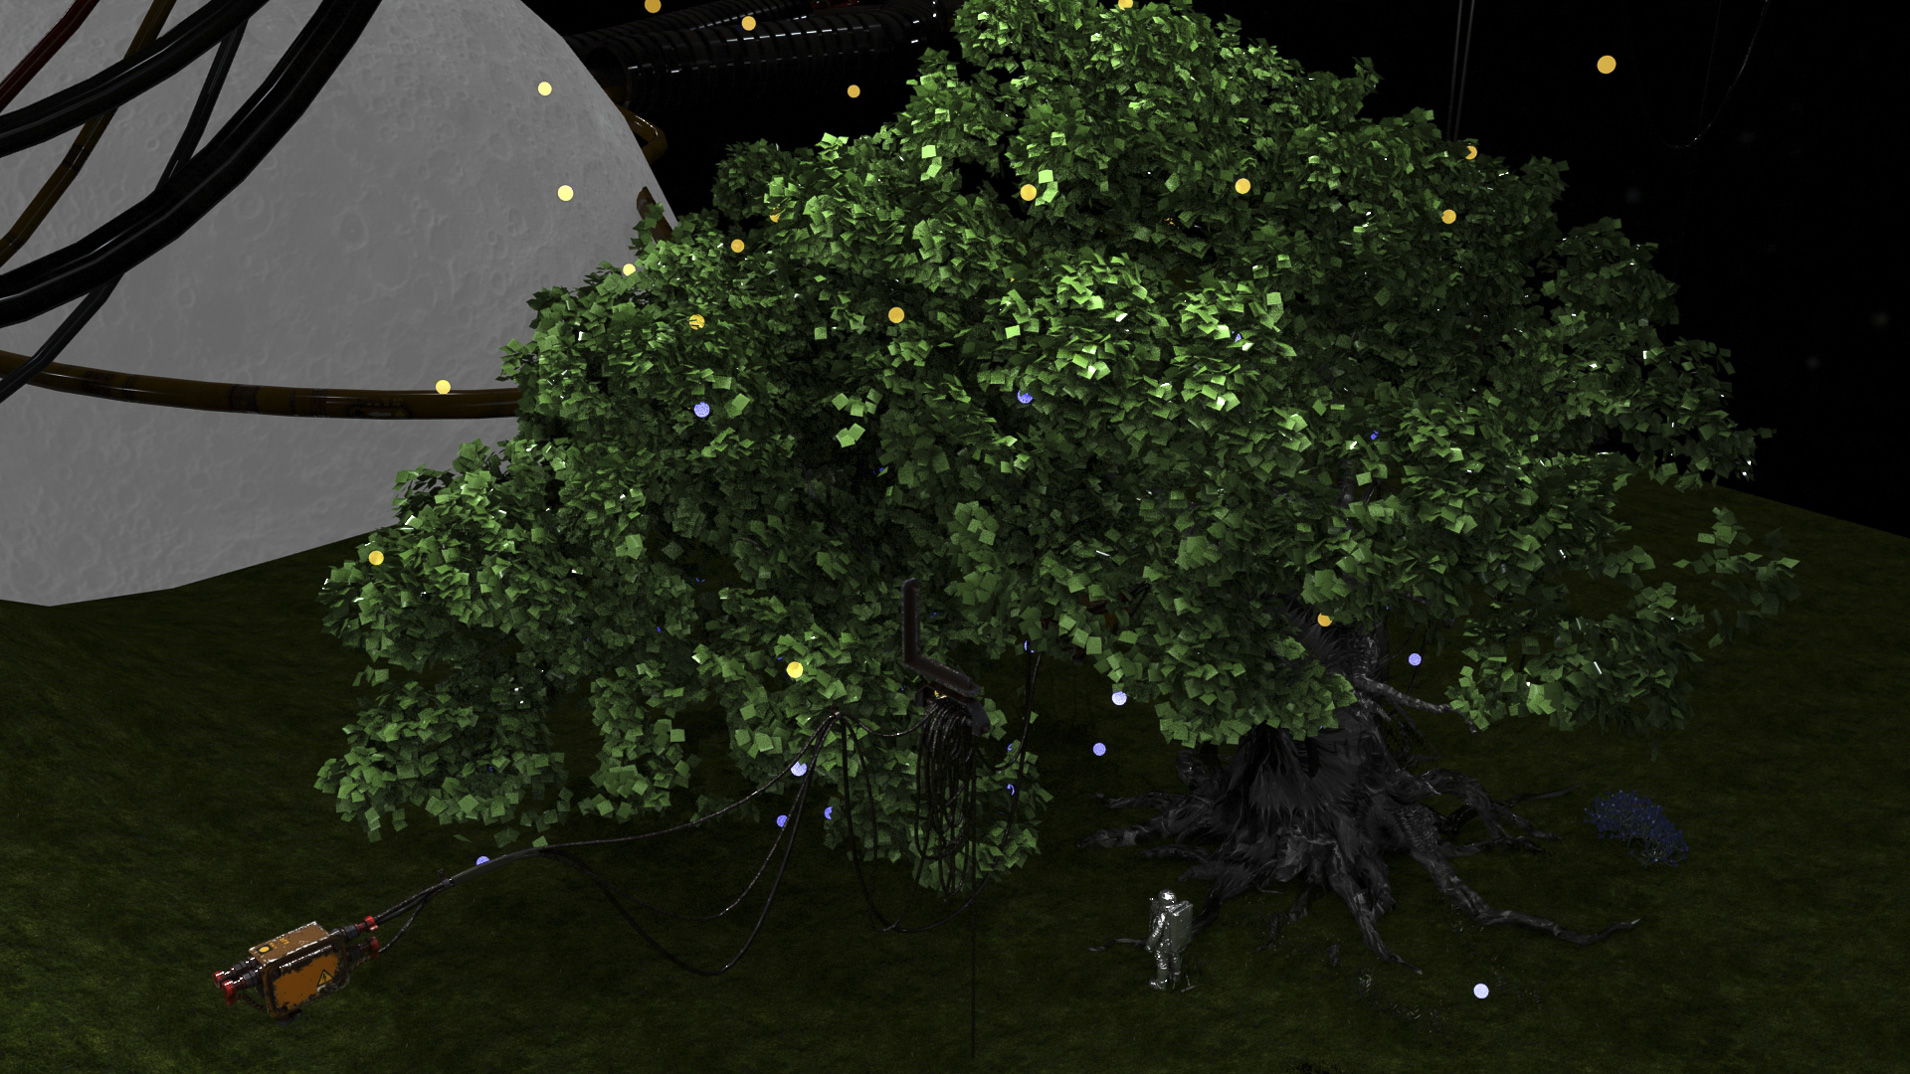 Still from a digital animation showing a tree